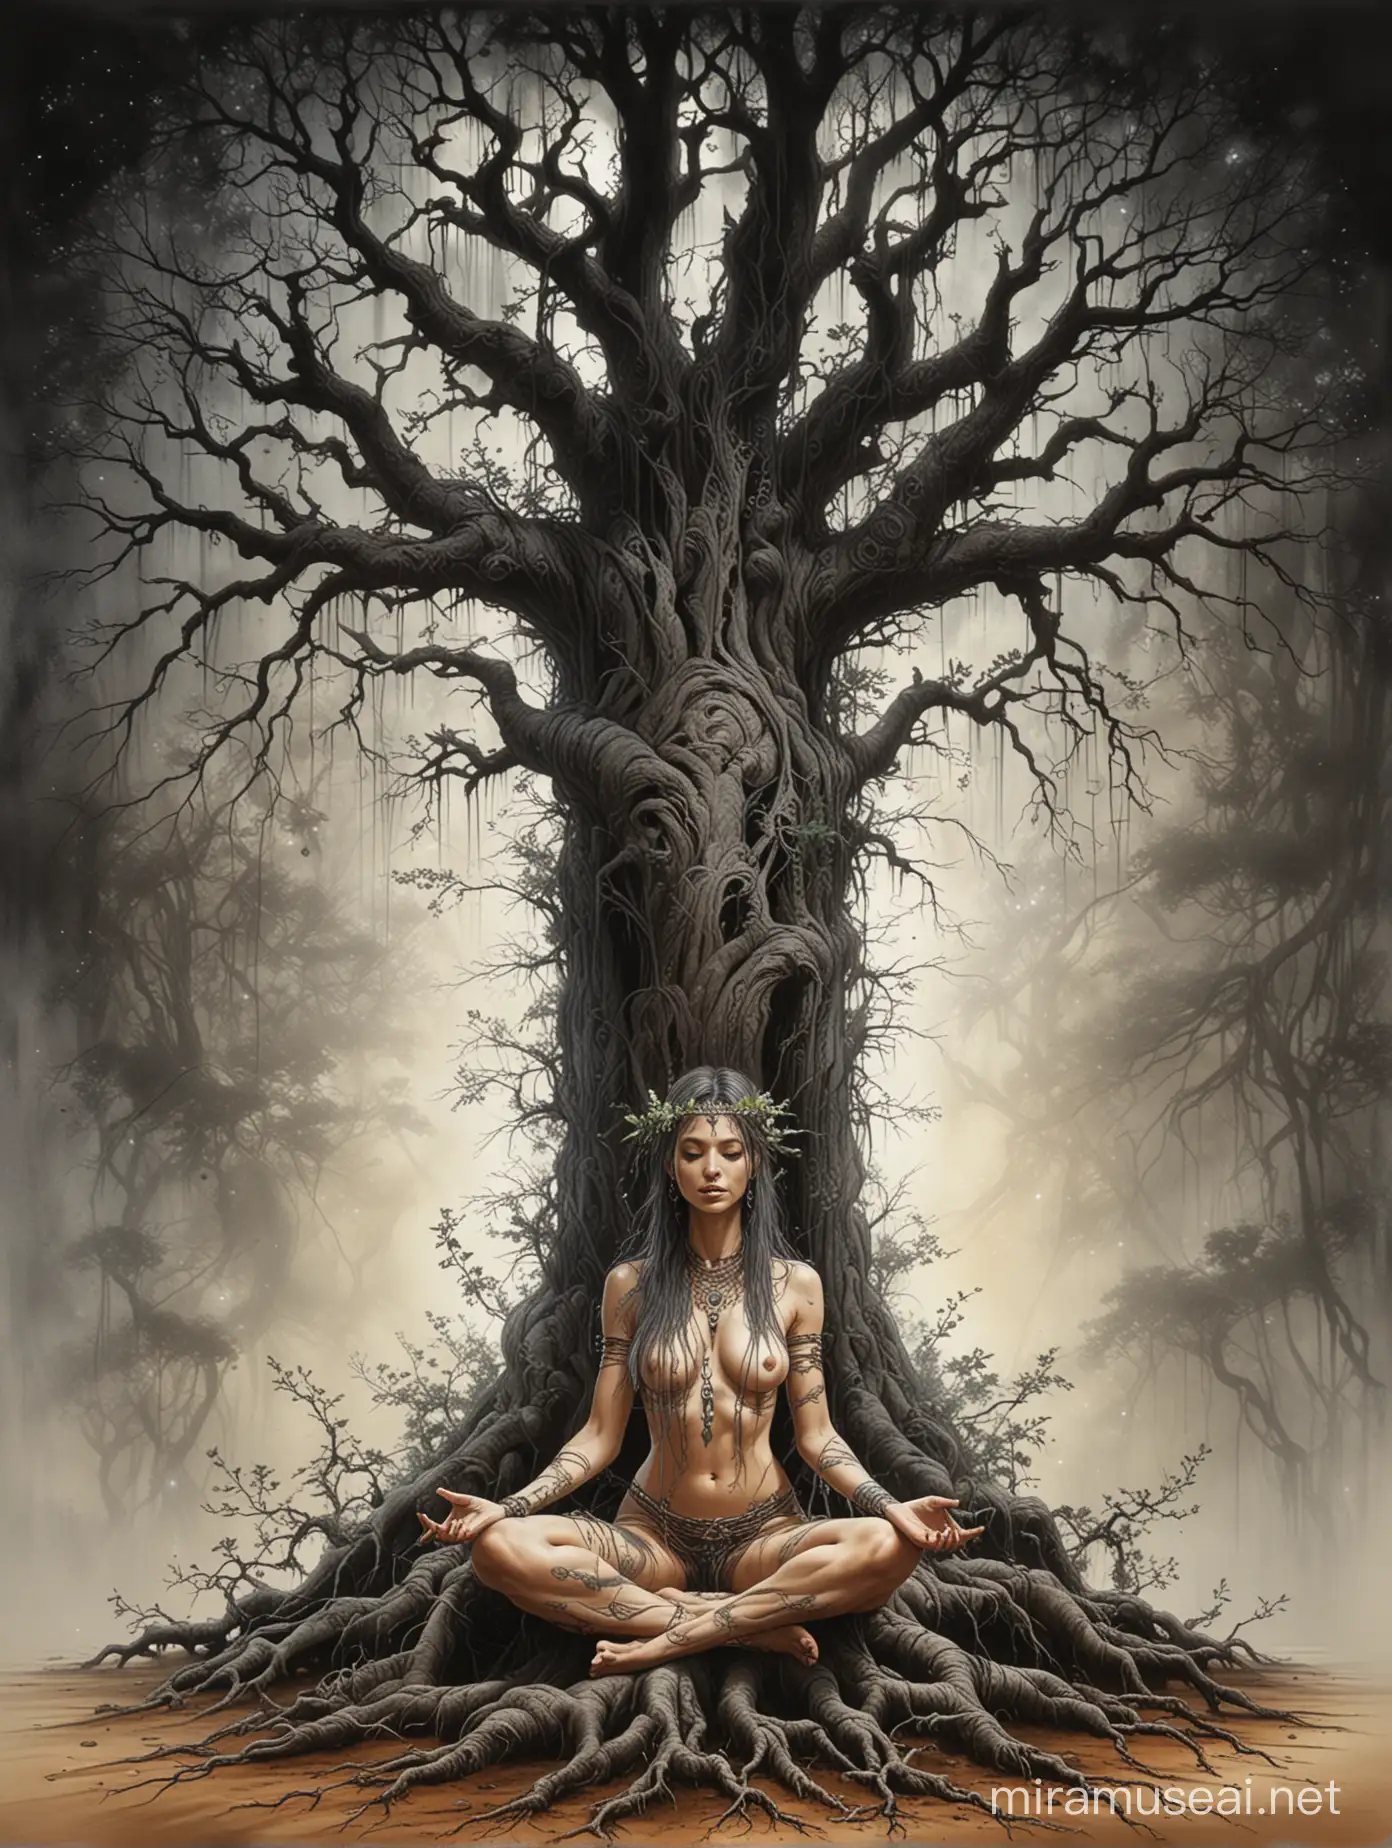 tree of life, cros section of earth, visible roots, luis royo style, beautiful goddess meditating under the tree sharing roots, sacred geometry, black ink details, vibrant colors, perfectly drawn, drawn with detail, lighting from above